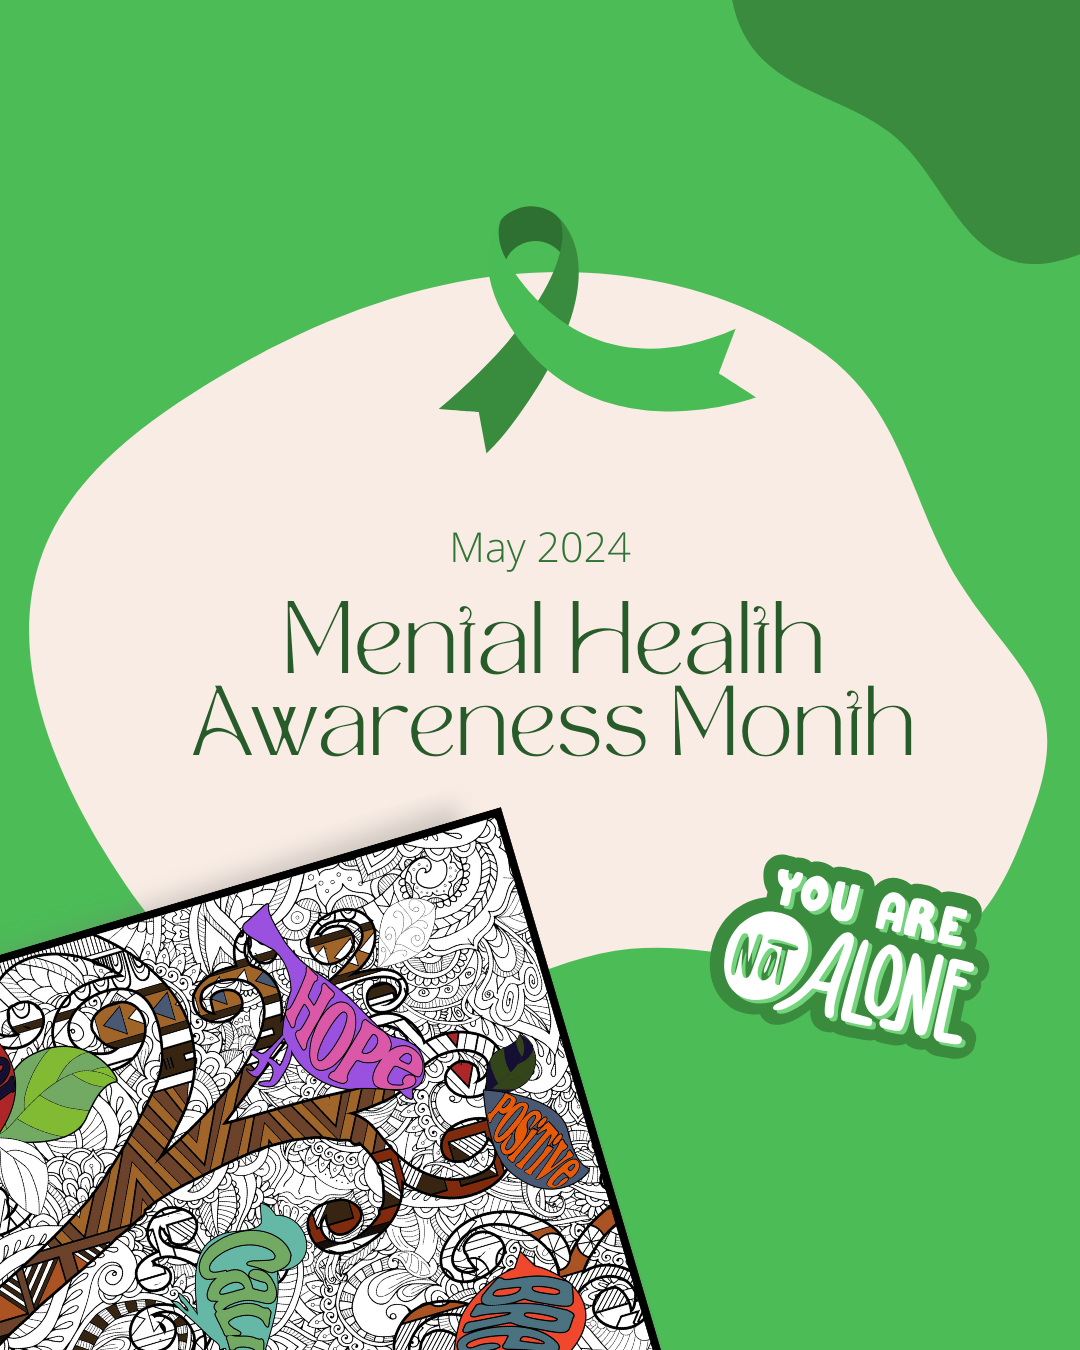 Activities to Improve Your Mental Health for Mental Health Awareness Month